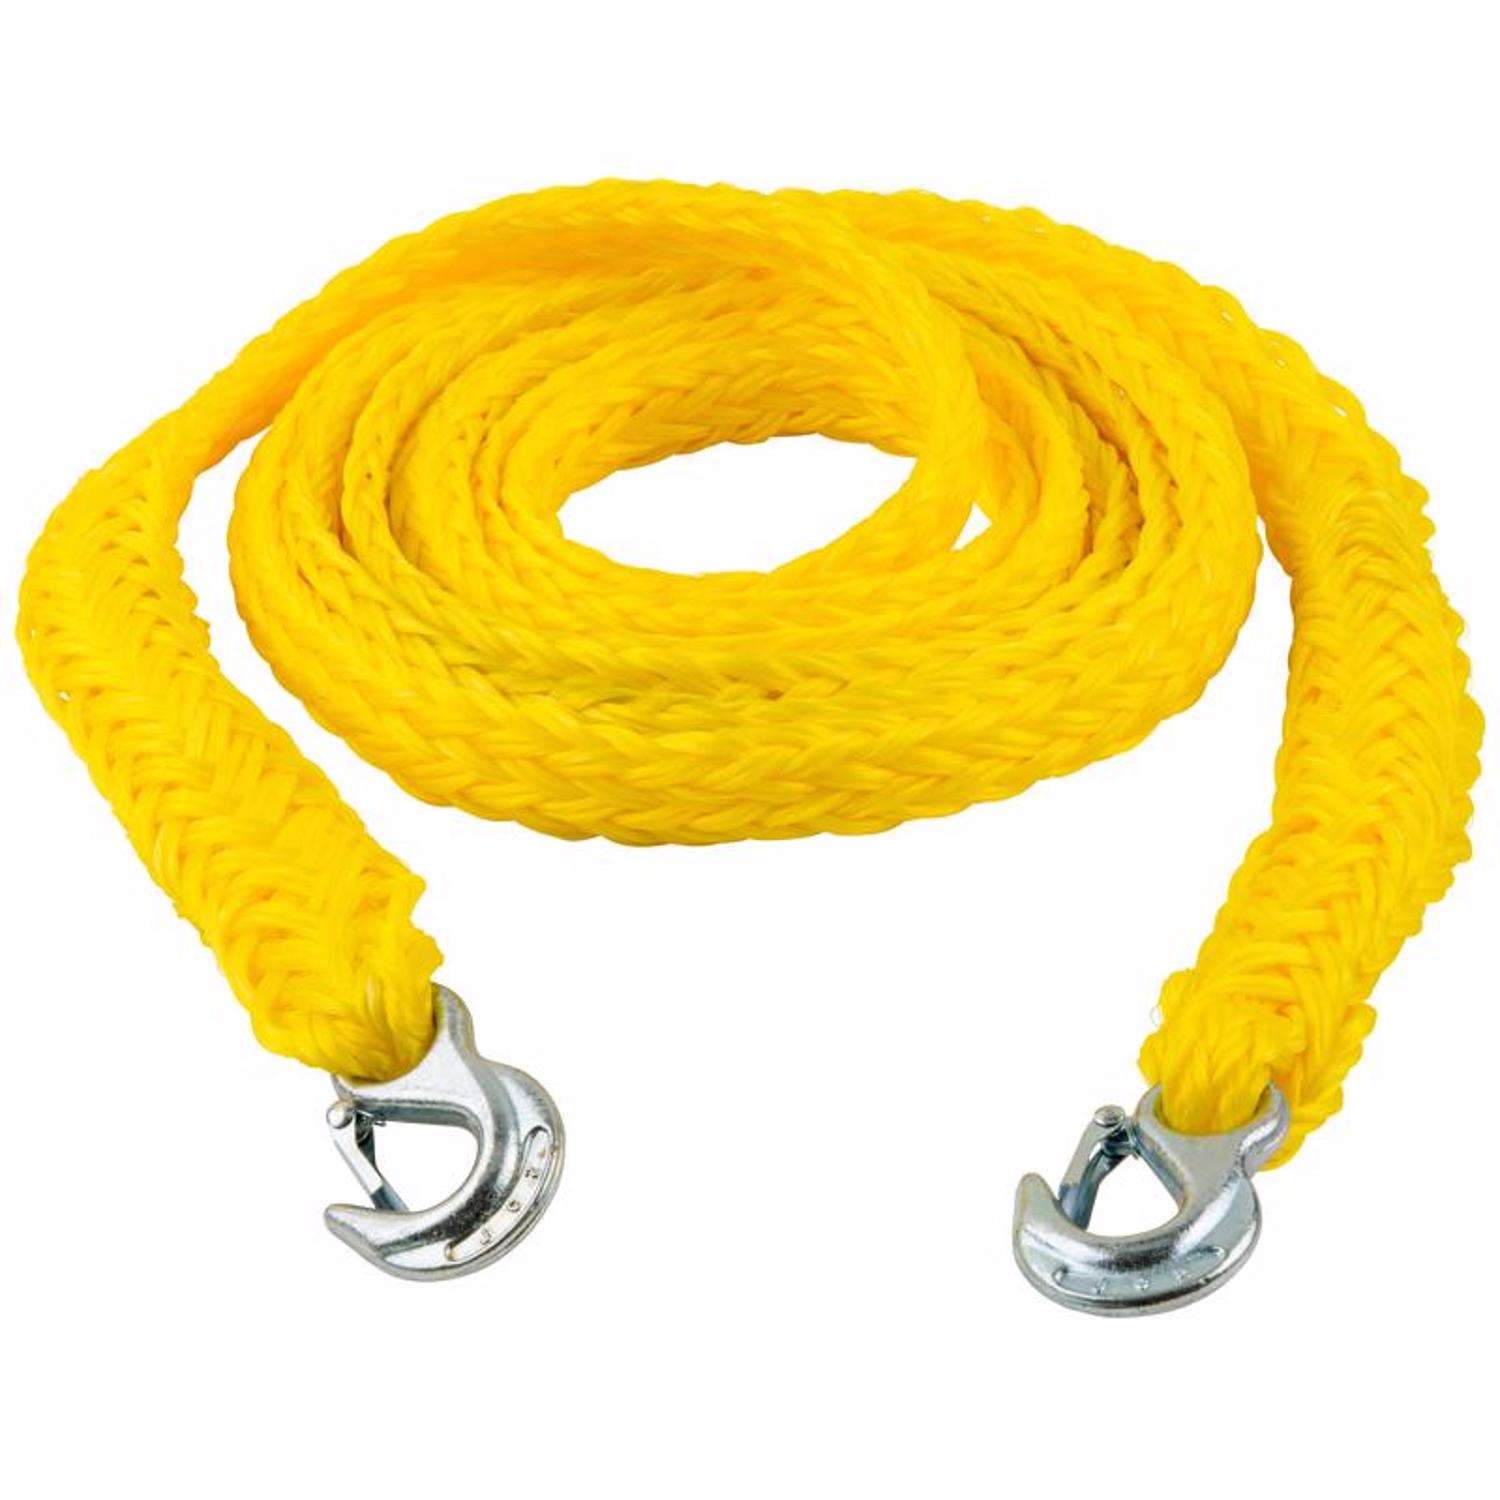 Keeper 7/8 in. W X 18 ft. L Yellow Tow Rope 6000 lb 1 pk - Ace Hardware